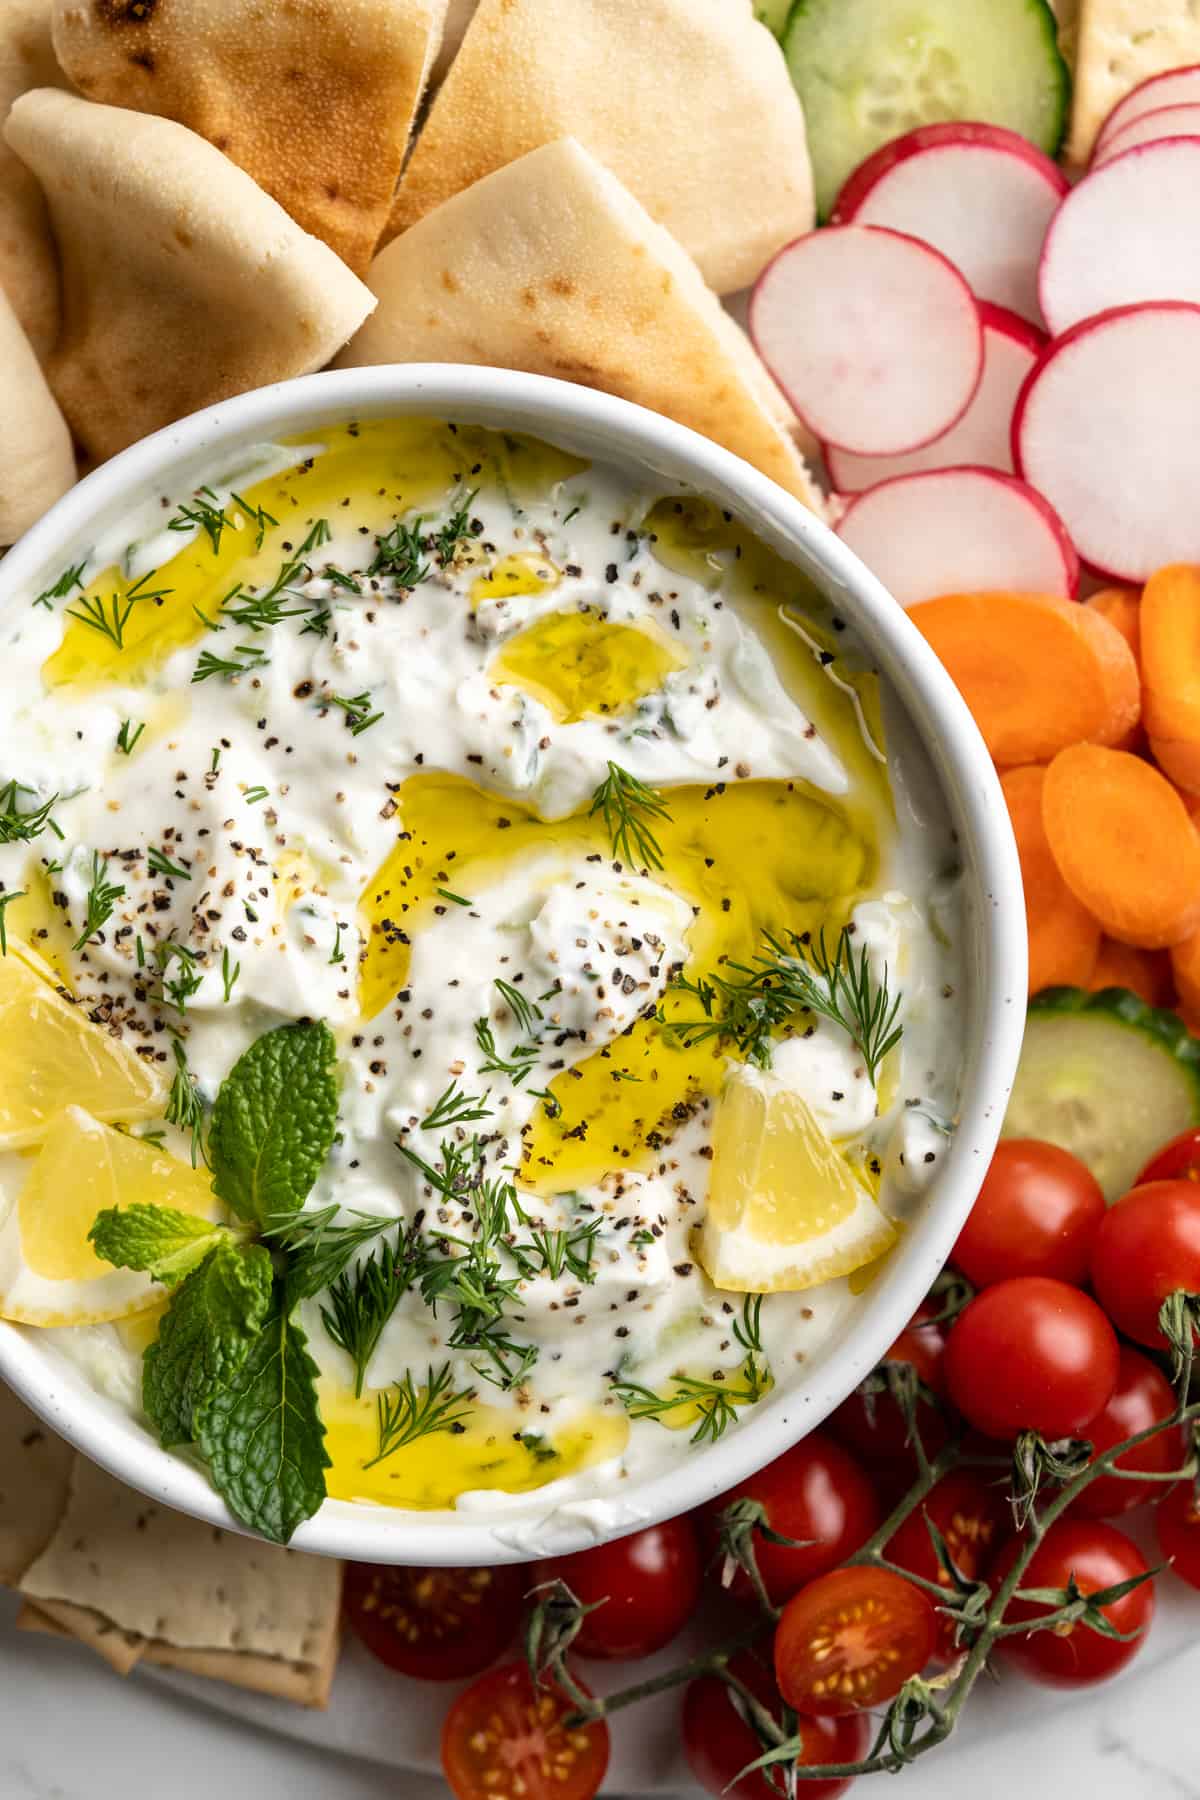 Overhead view of vegan tzatziki in bowl with drizzle of olive oil, fresh herbs, and lemon pieces